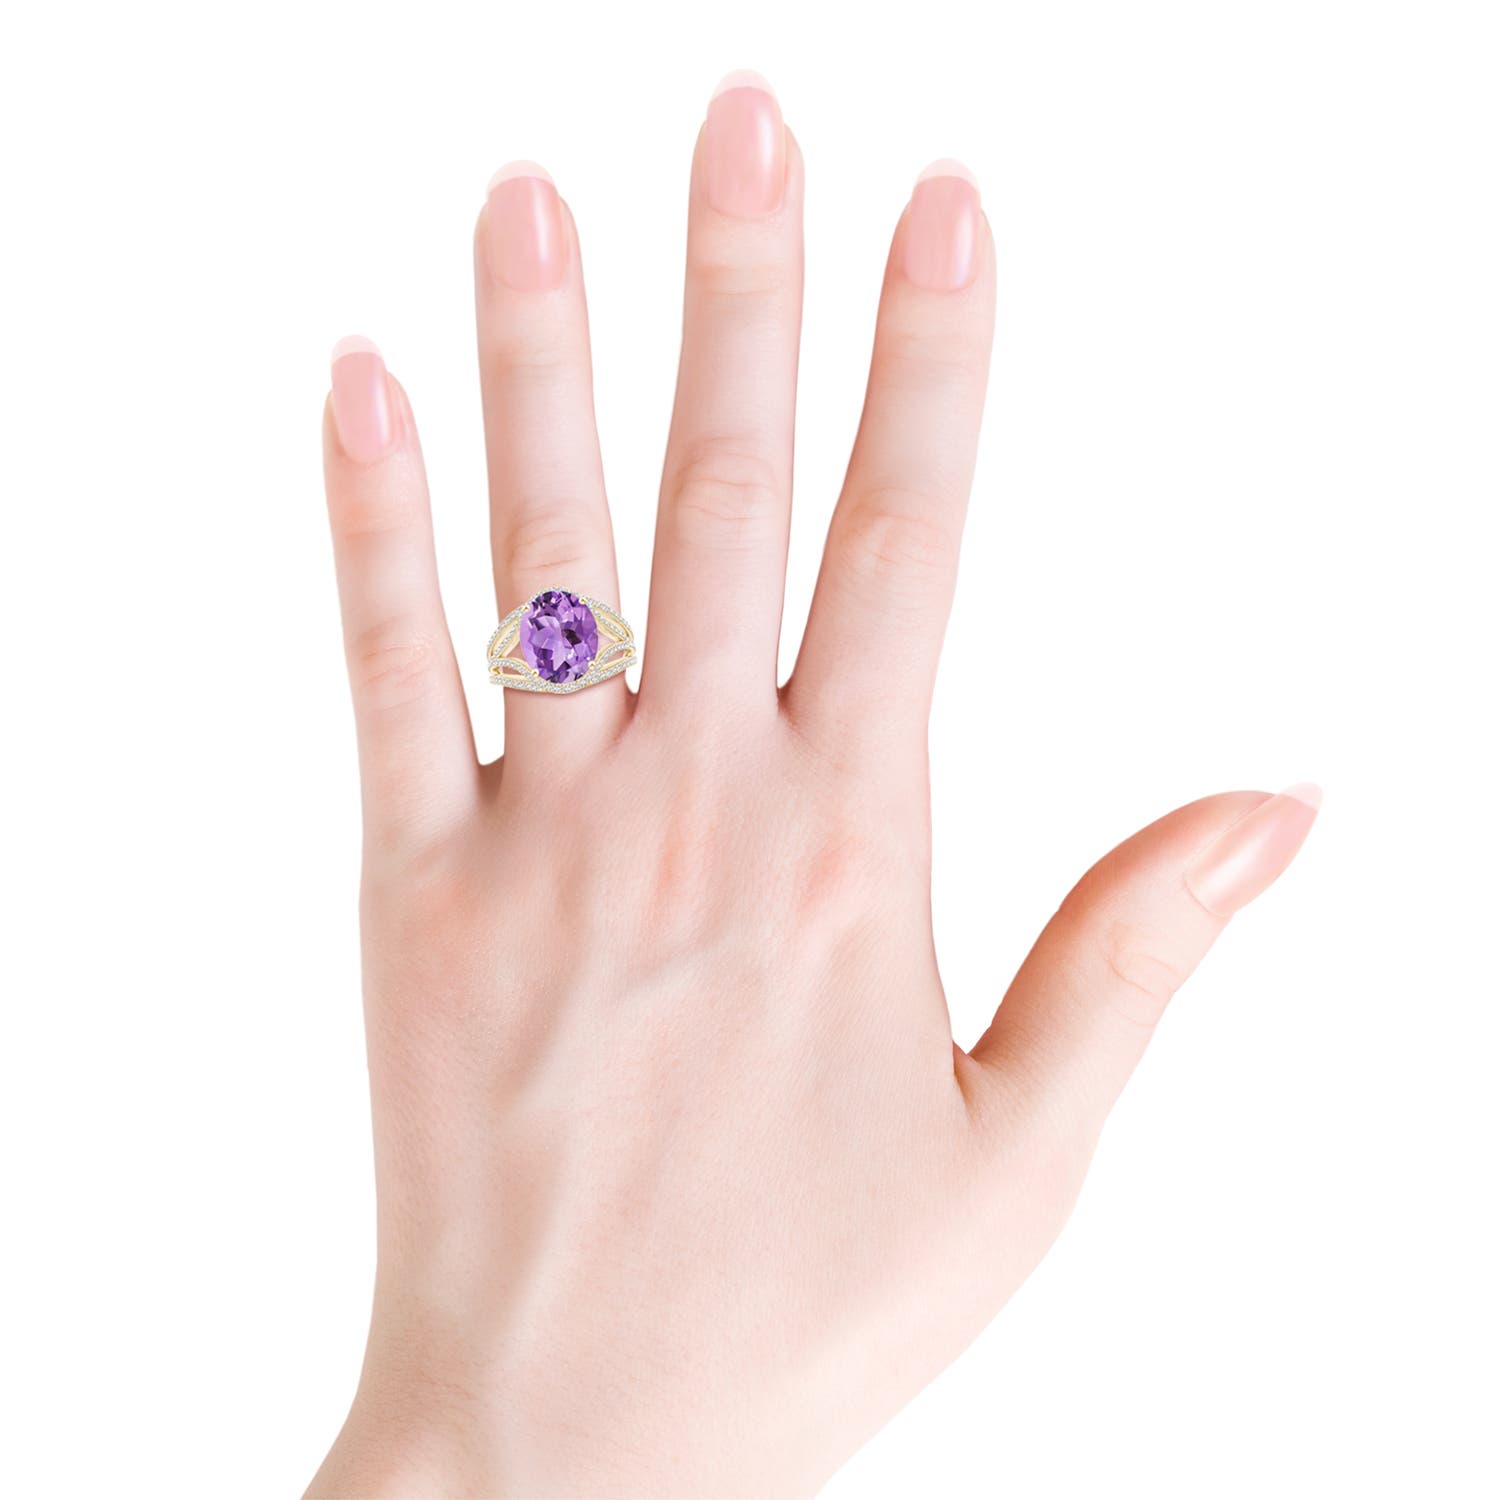 A - Amethyst / 4.94 CT / 14 KT Yellow Gold